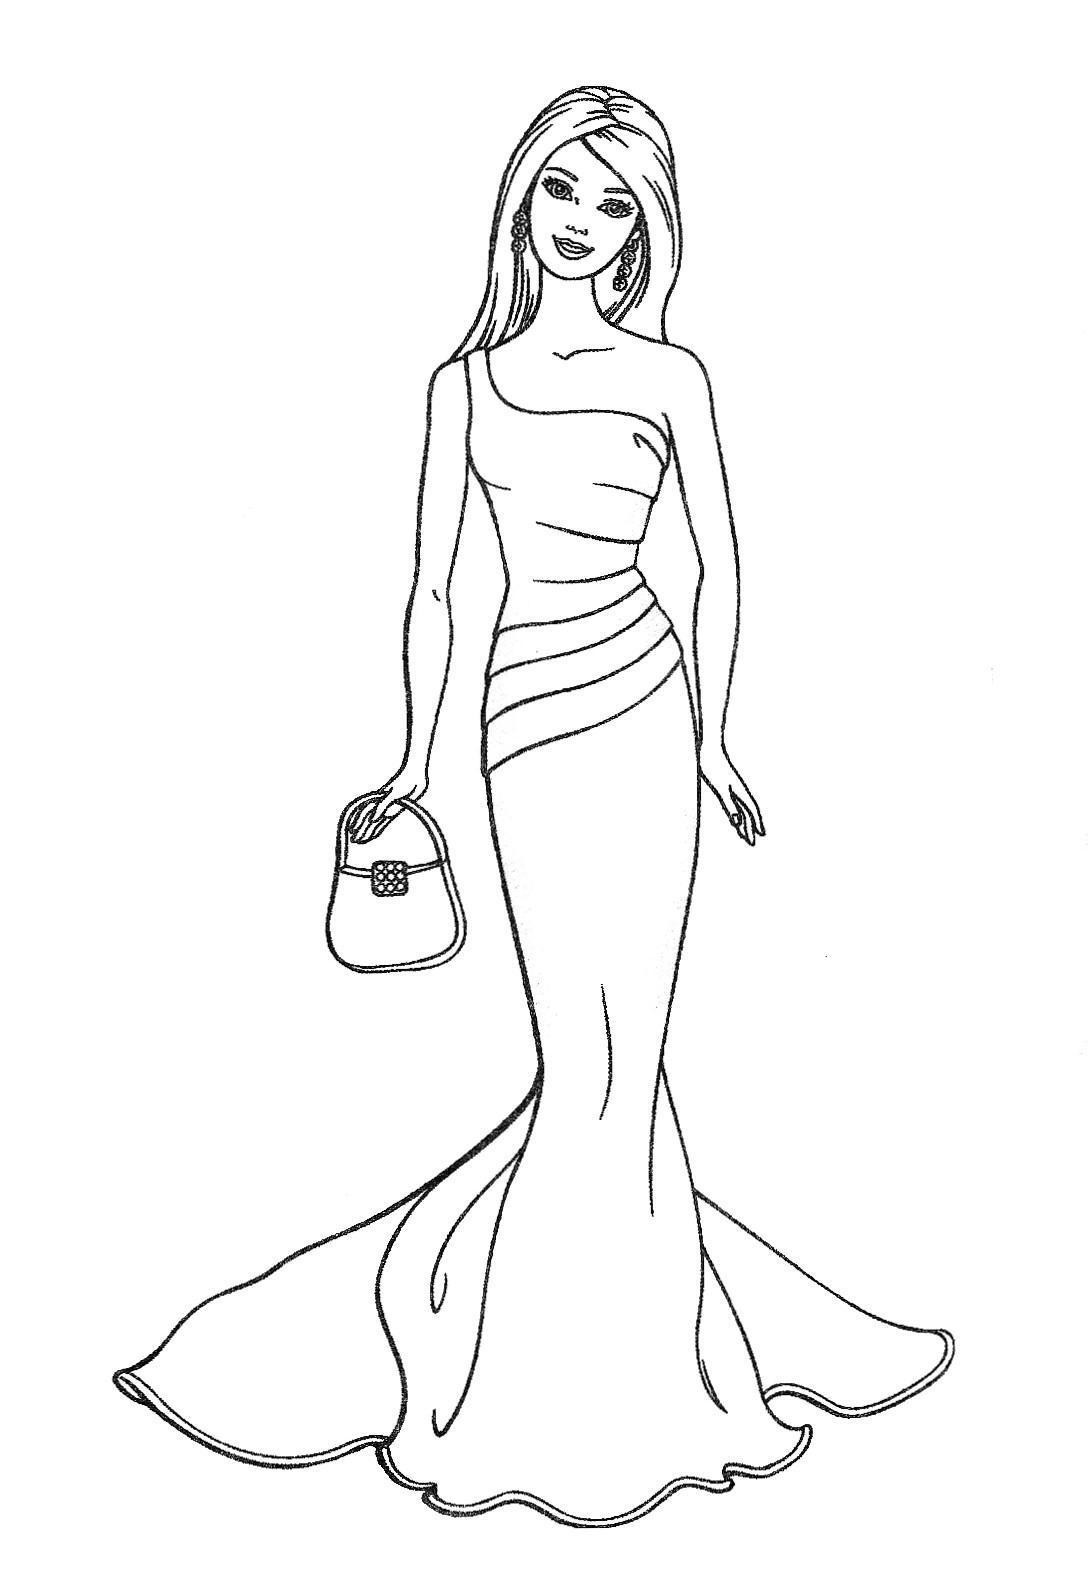 Princess Coloring Pages For Girls
 princess coloring pages for girls Free